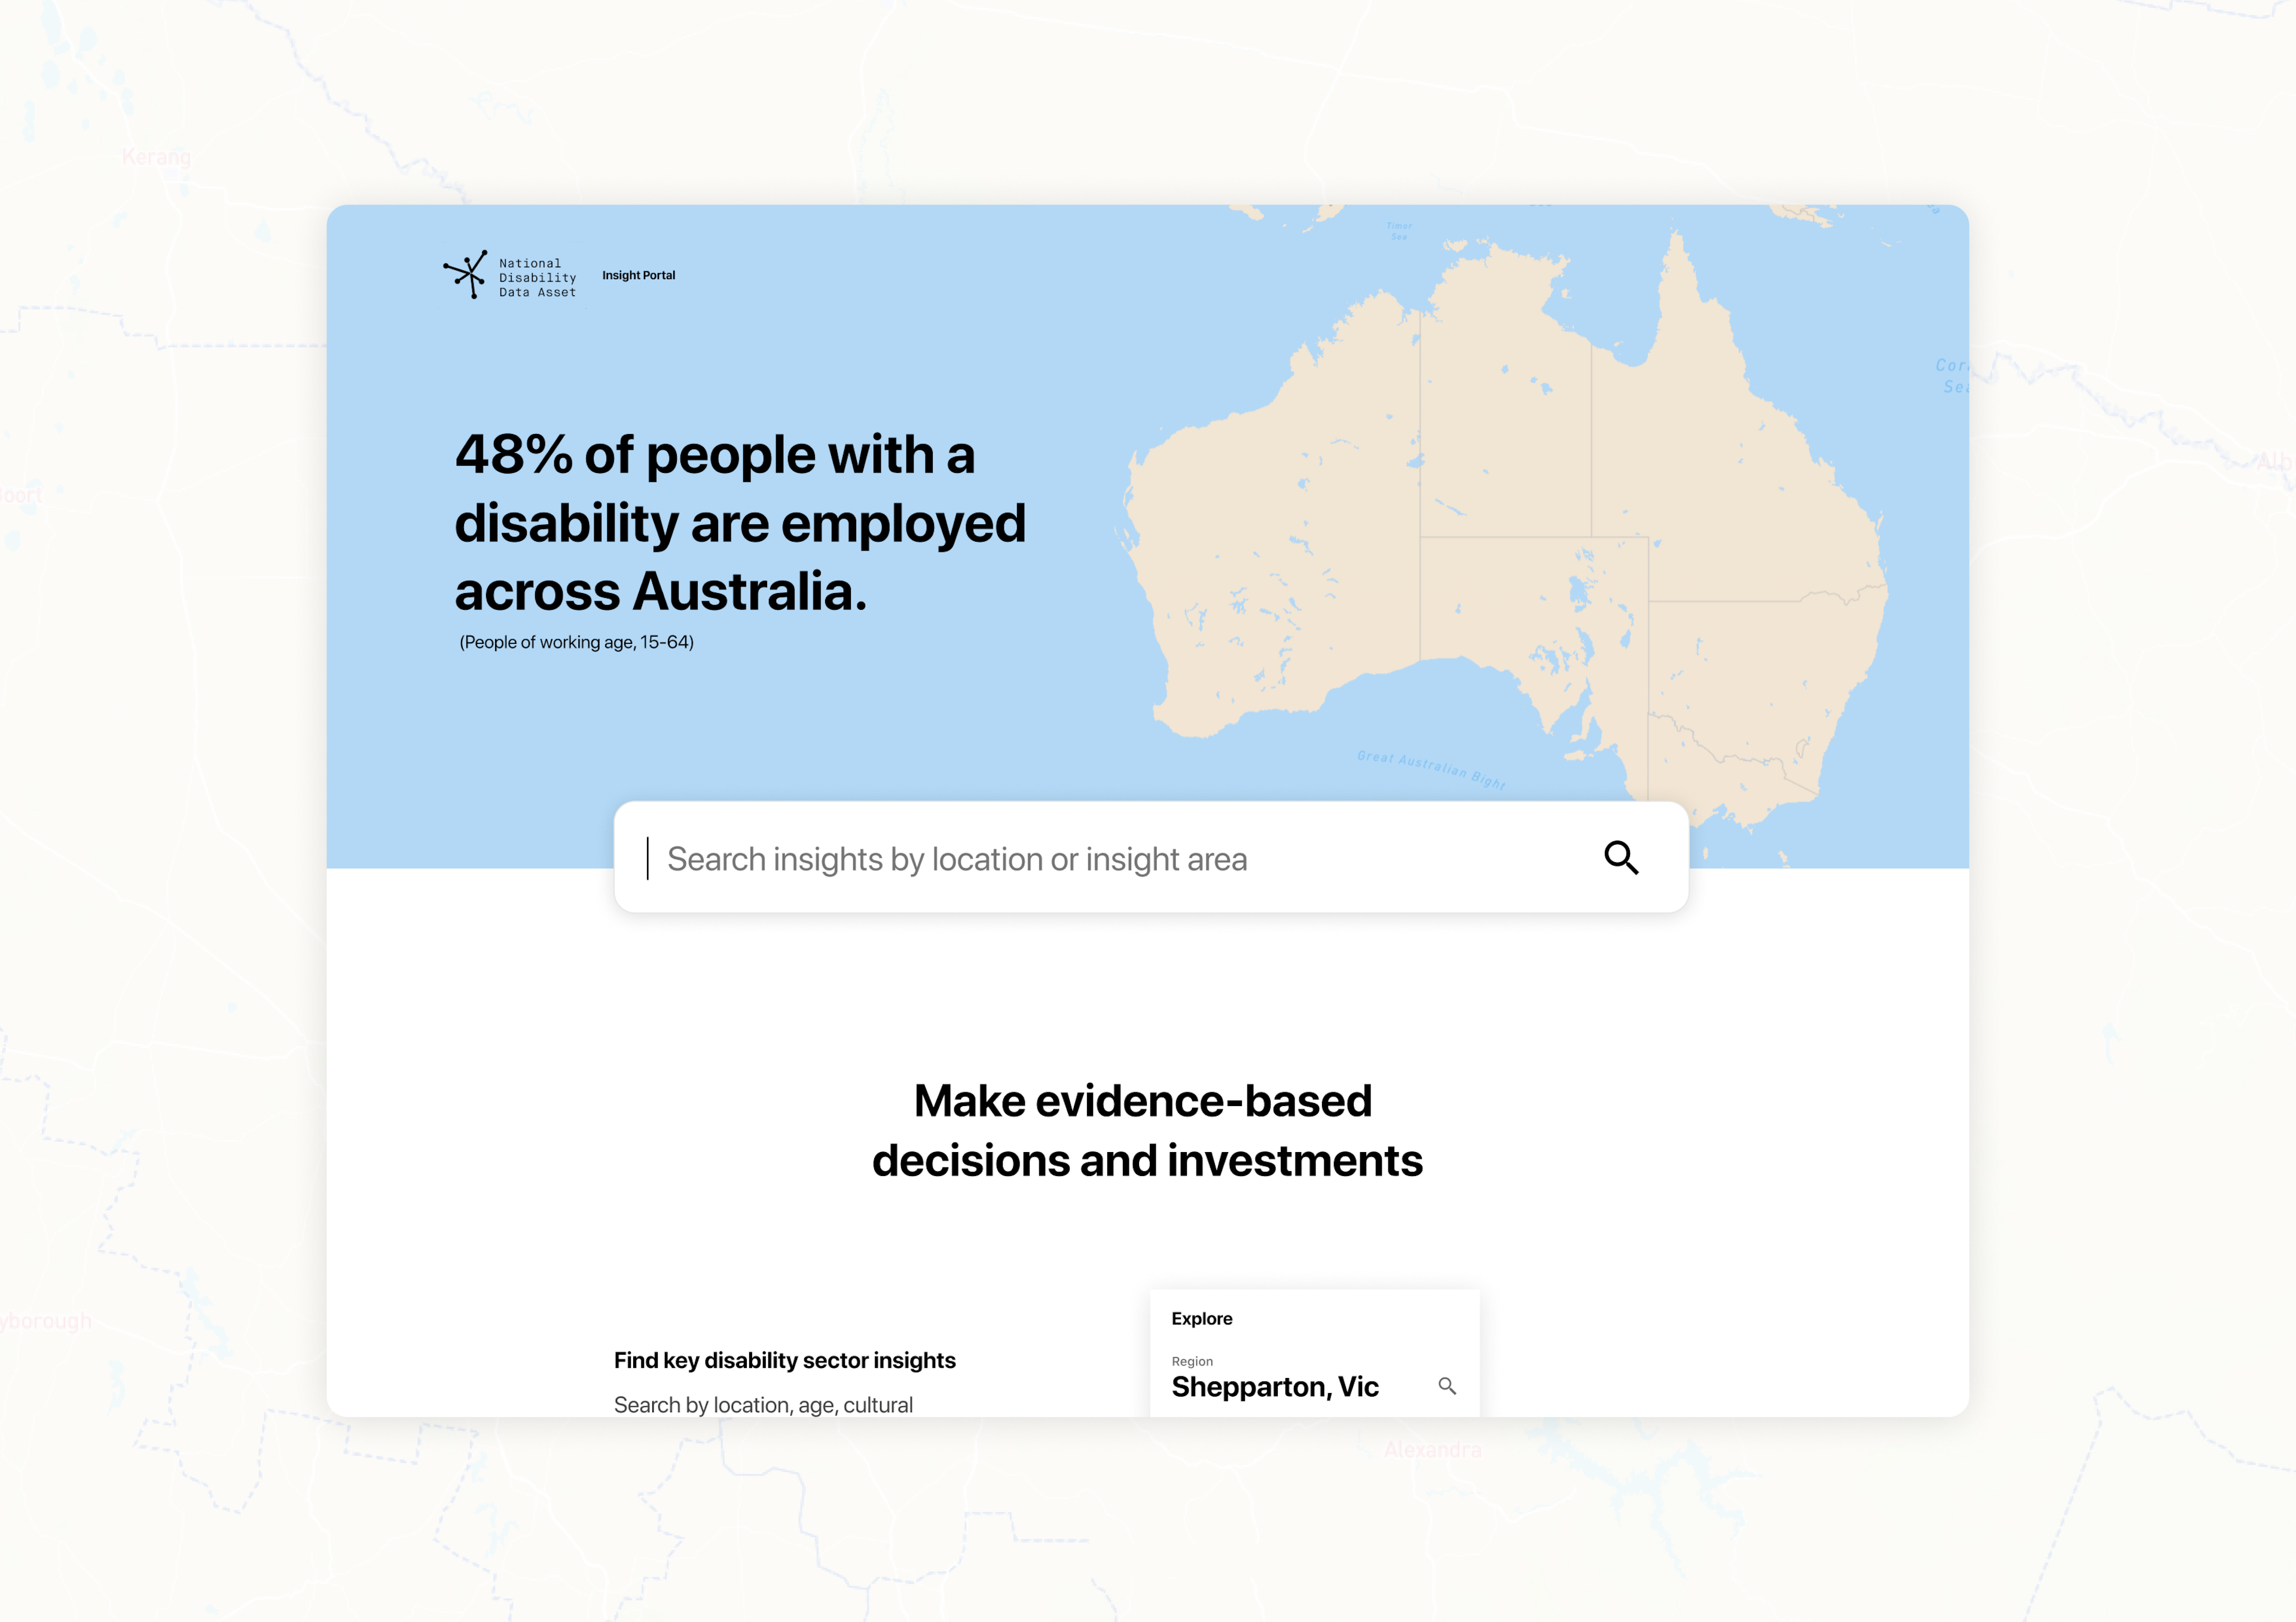 Image of the home page of the prototype, showing statistics, a map of Australia and a search bar